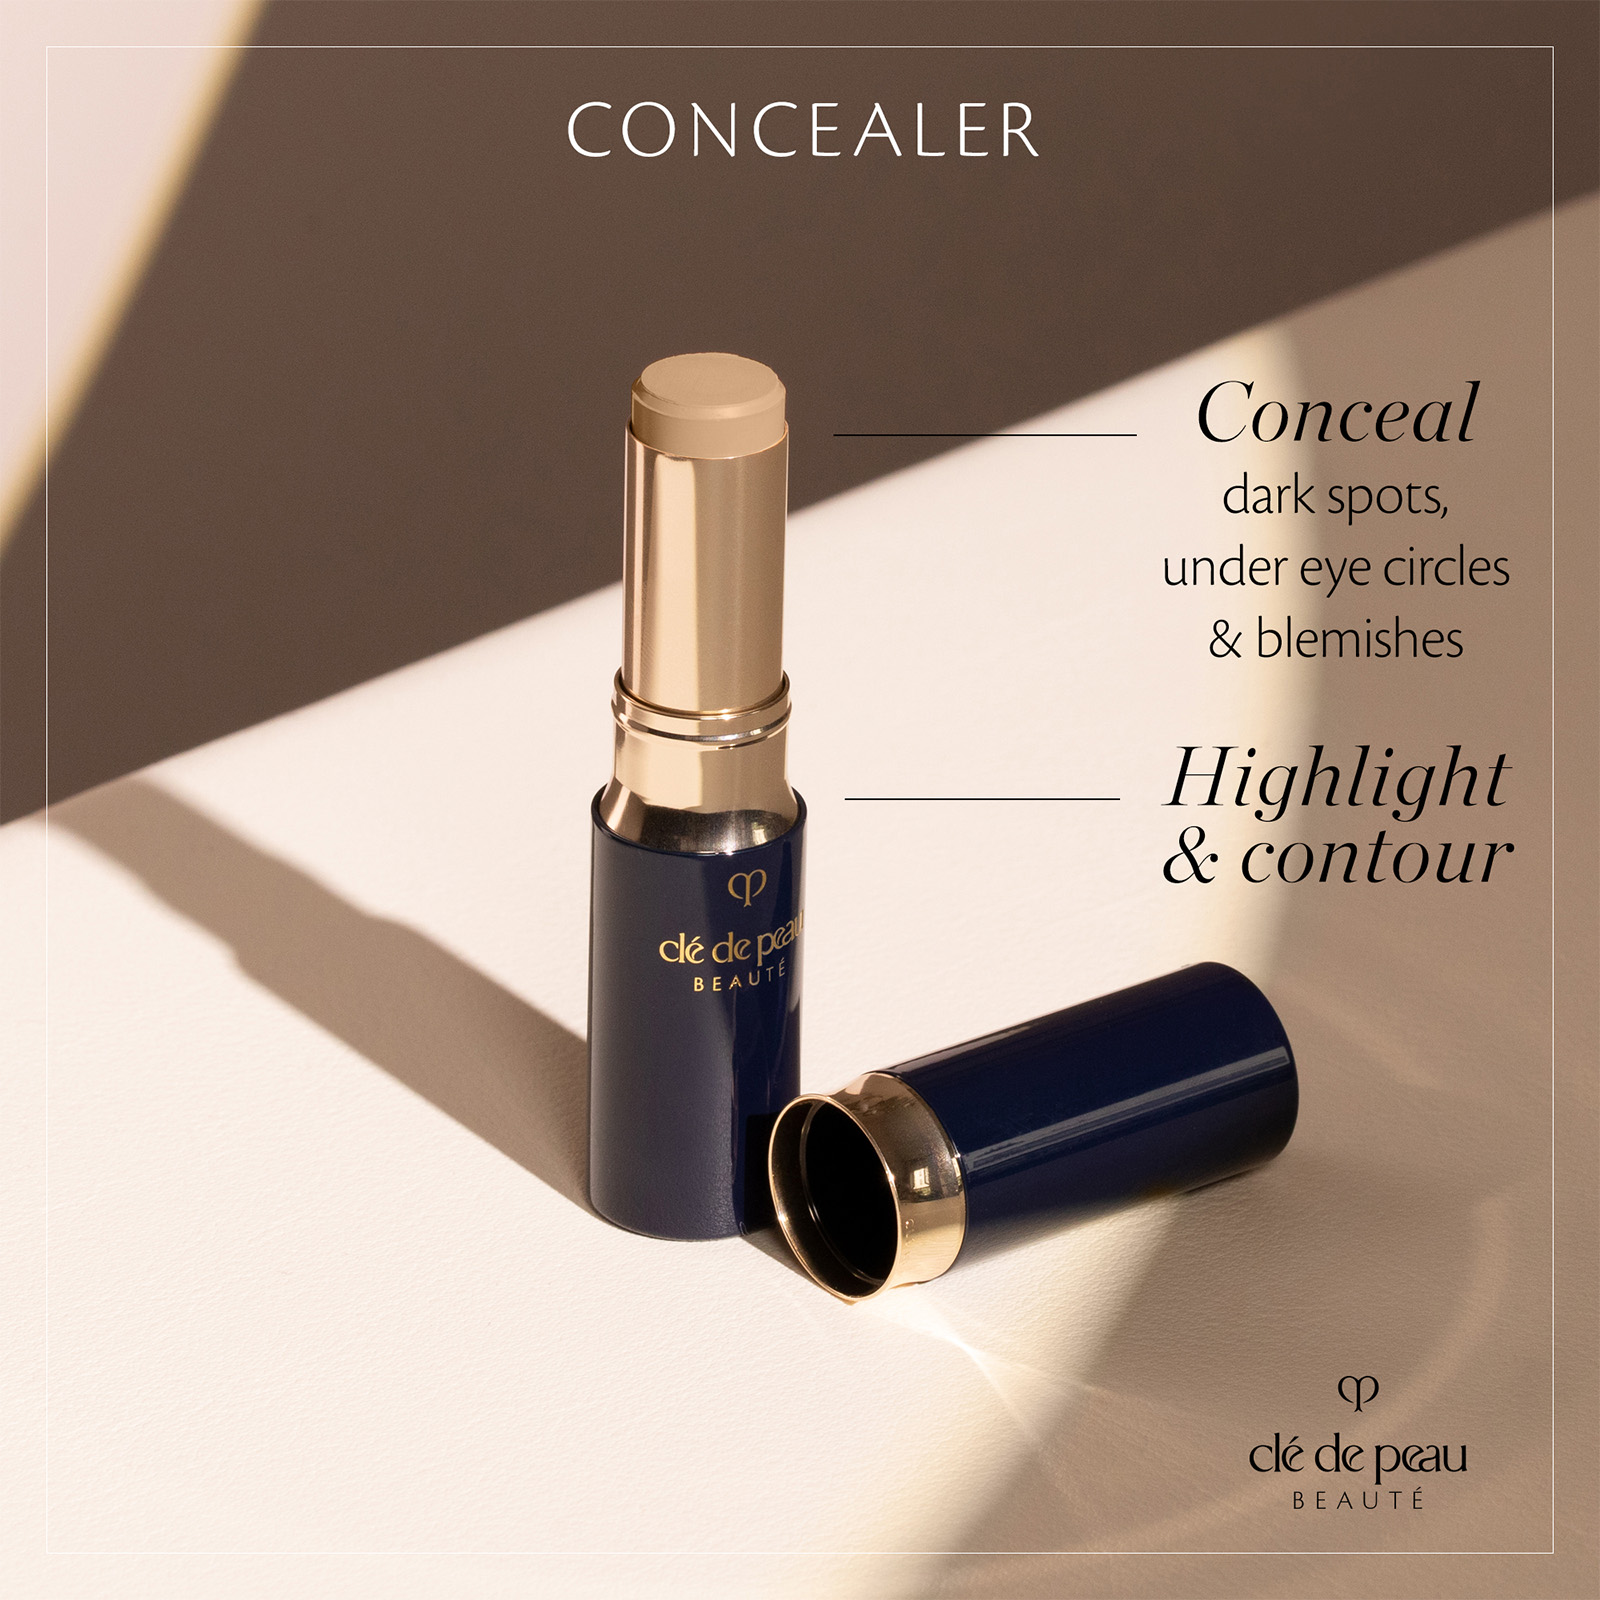 Concealer. Conceal dark spots, under eye circles and blemishes. Highlight and contour.